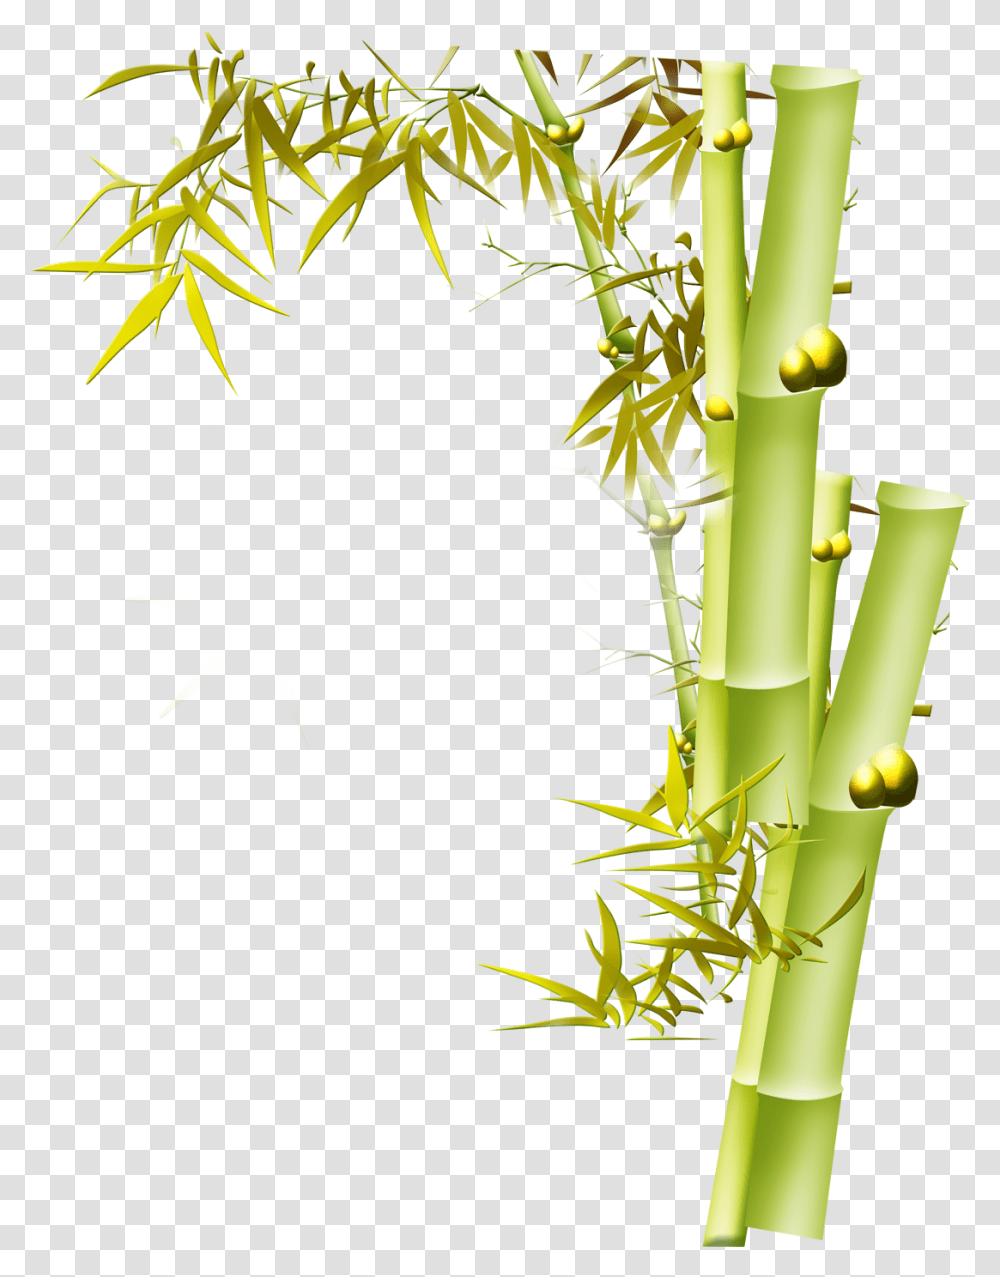 Clip Art Graphic Design Bird And Bamboo Yellow Flower Background, Plant Transparent Png